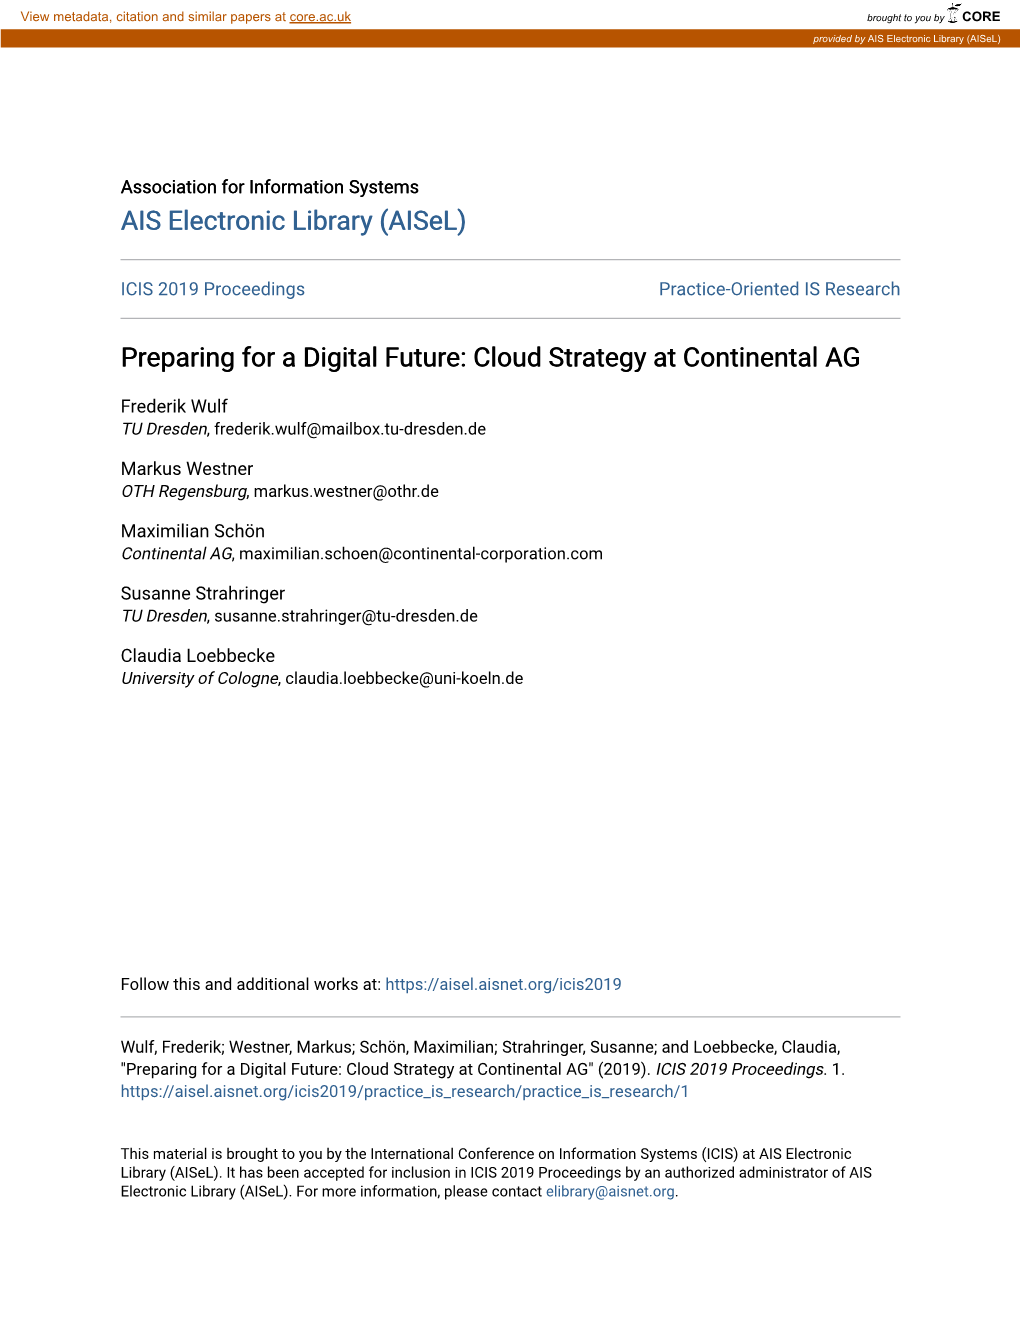 Cloud Strategy at Continental AG